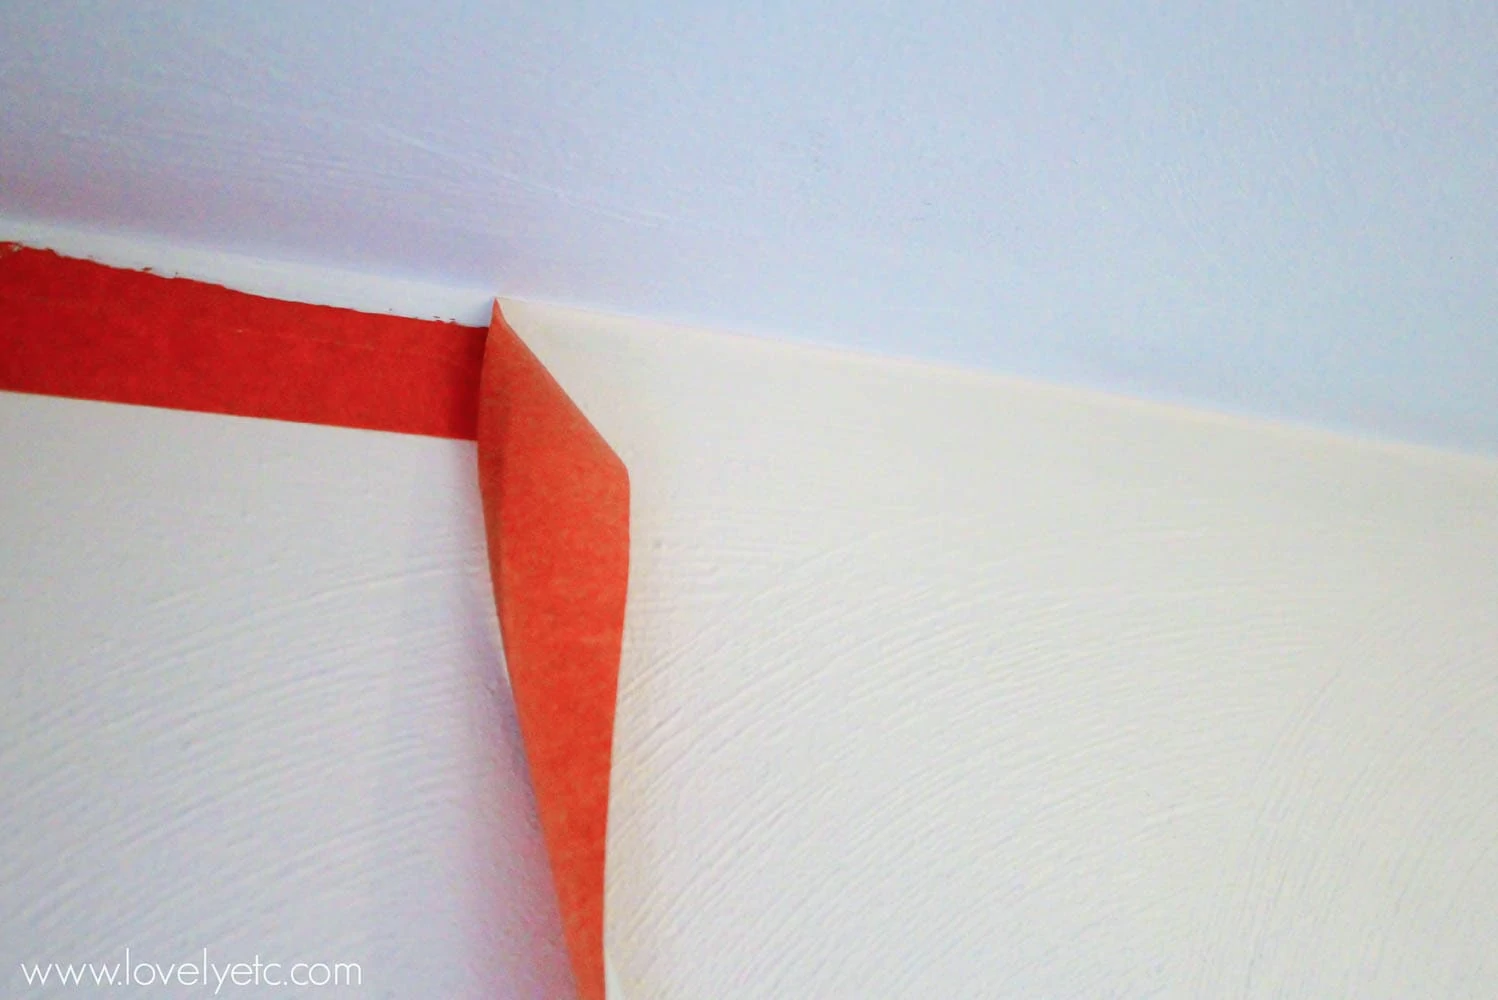 pulling painter's tape down after painting ceiling.